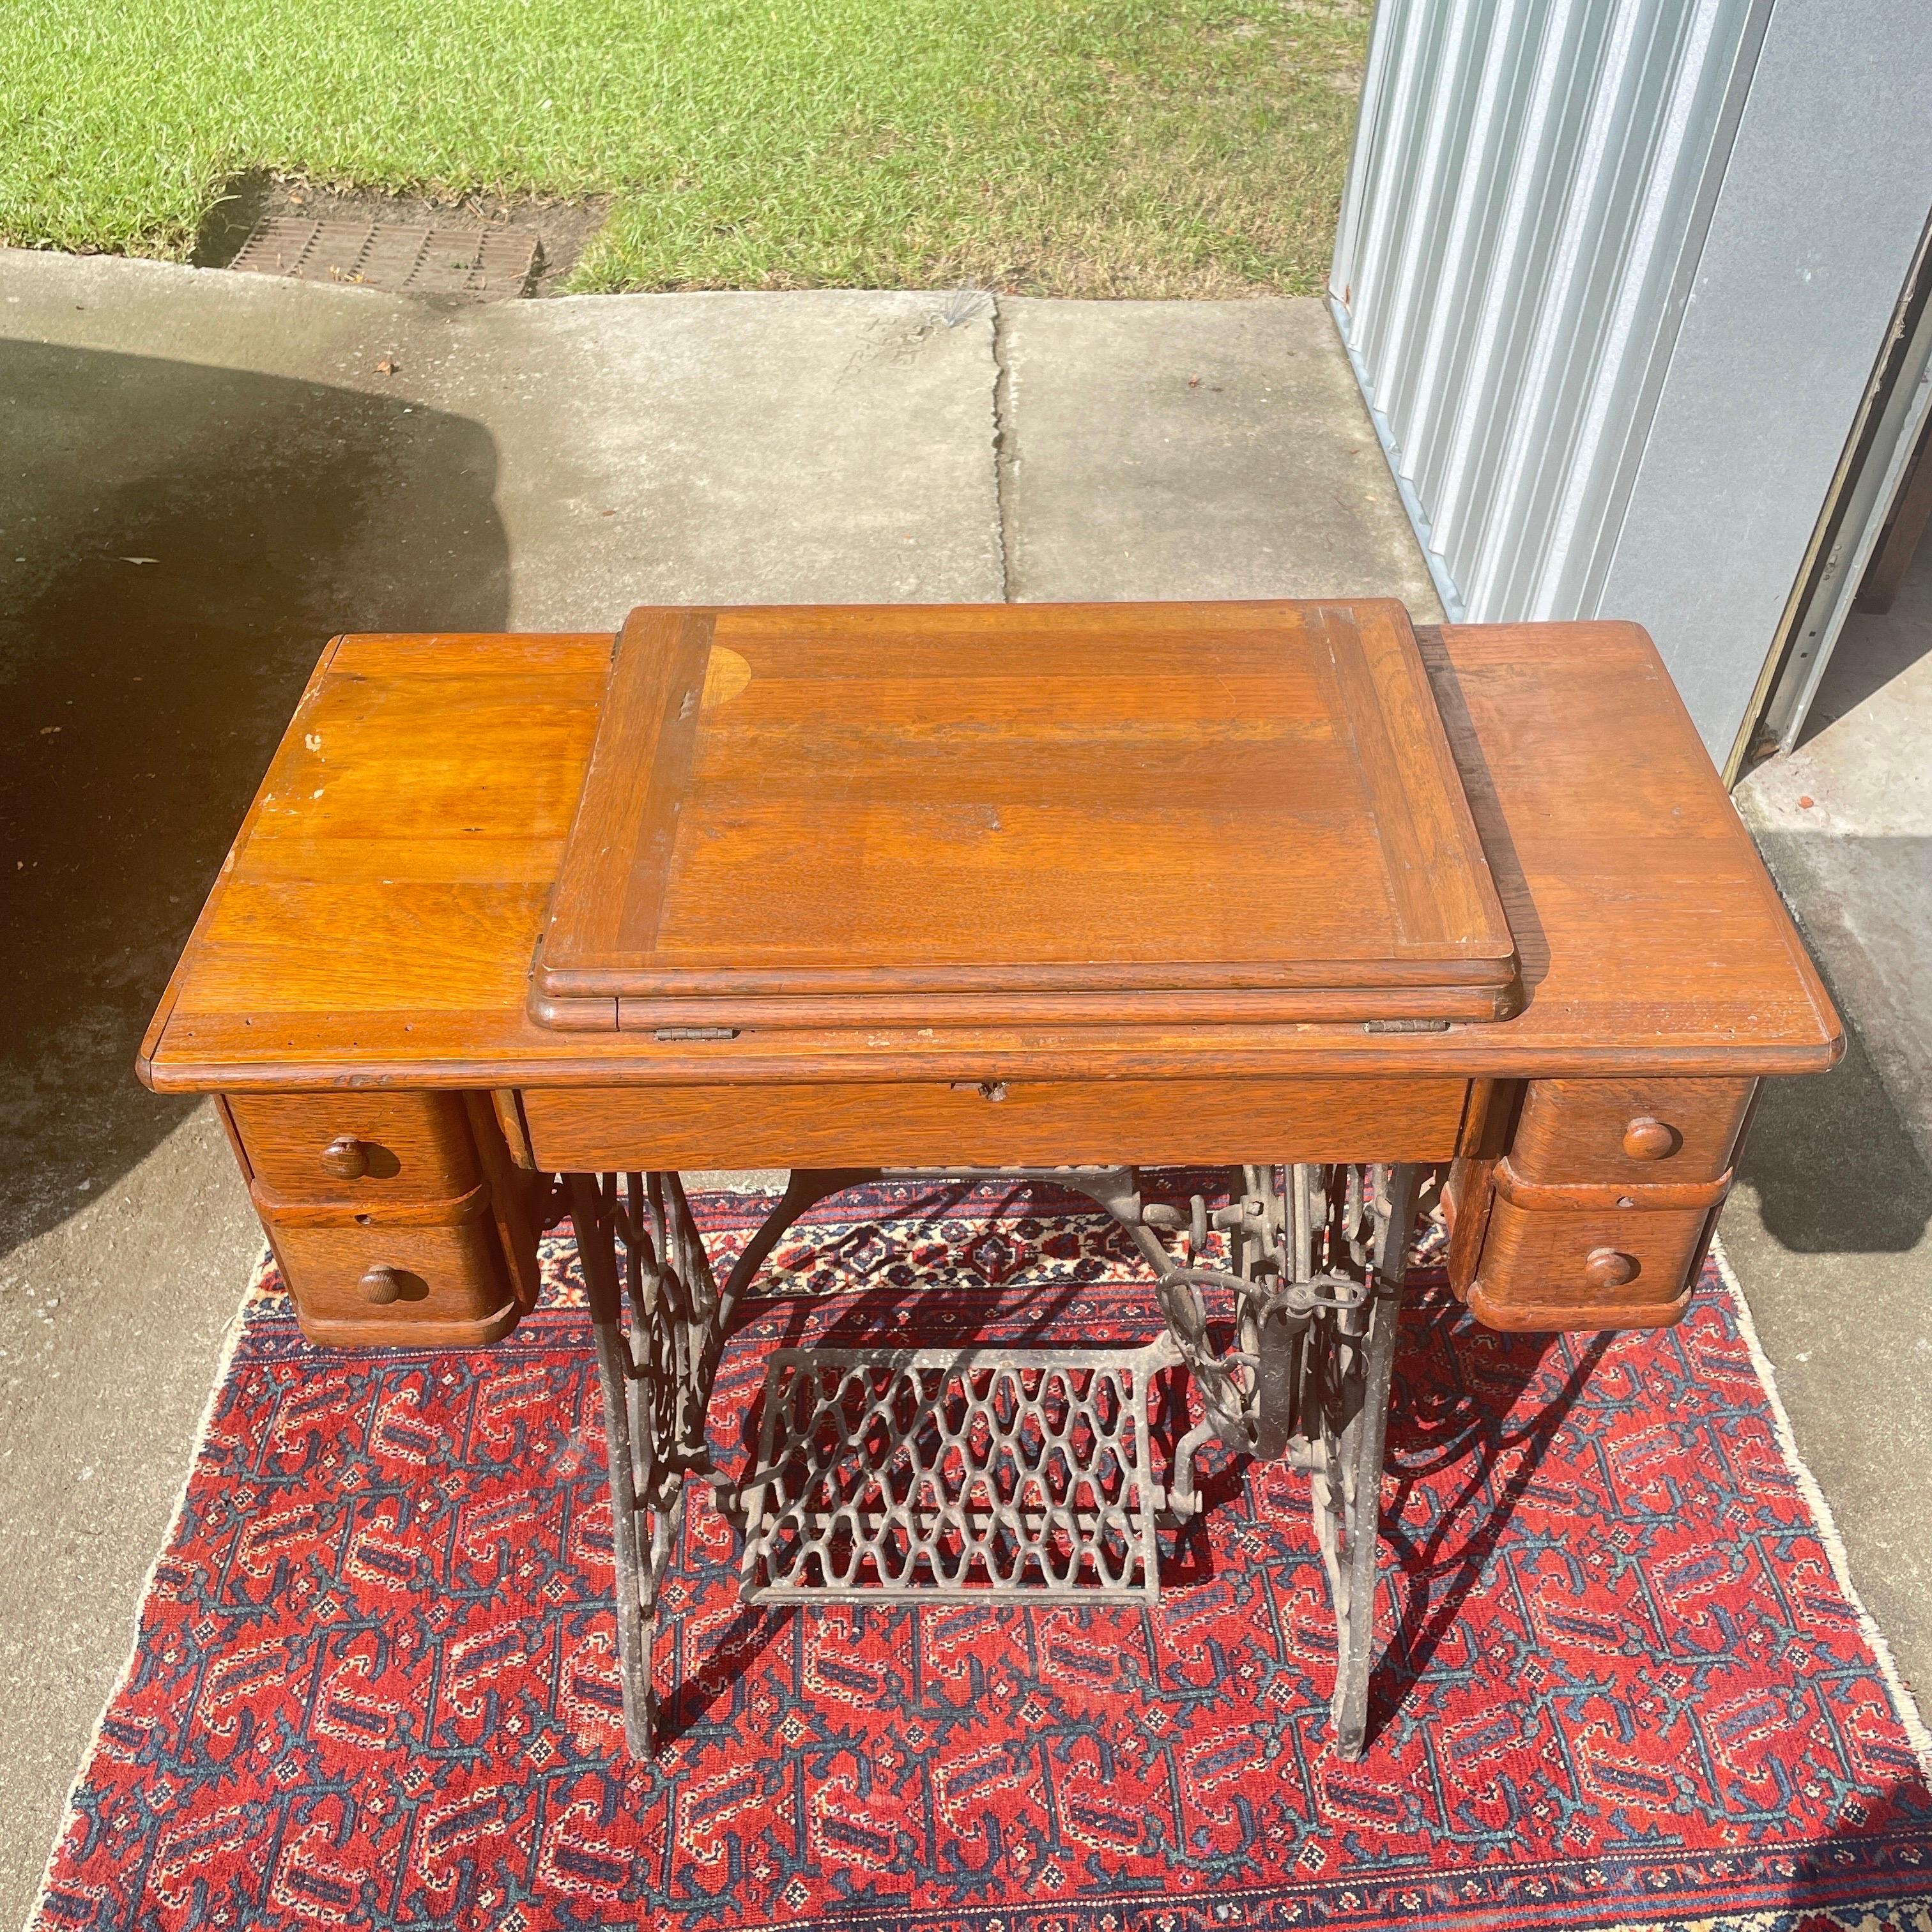 Hand-Crafted Vintage Singer Sewing Machine - Work Table For Sale